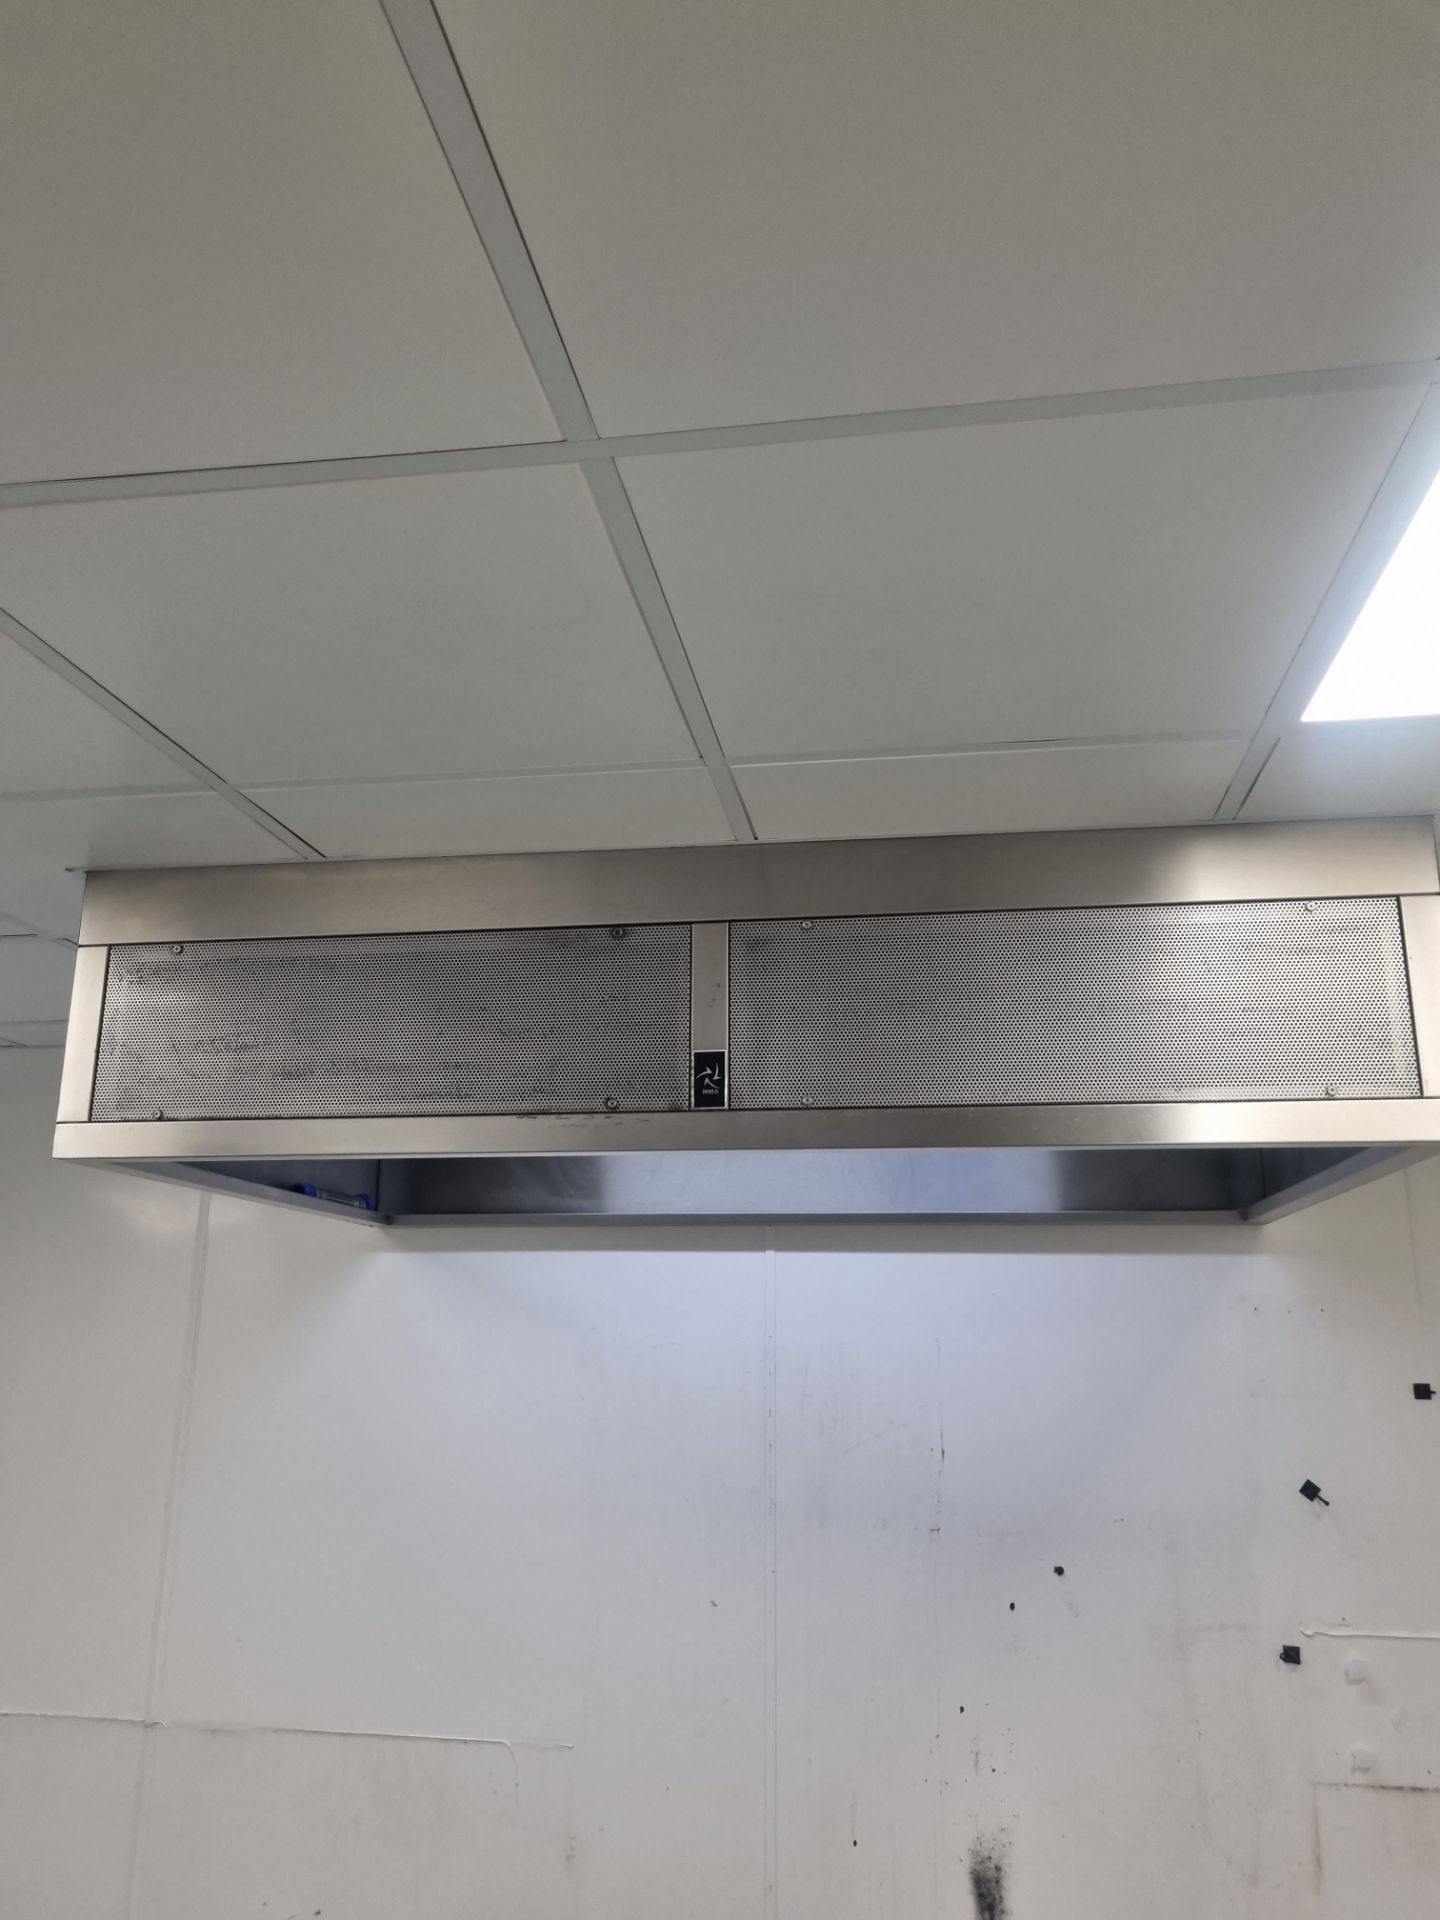 HMA Ventilation stainless steel canopy manufactured from 304 grade Stainless Steel 180 x 115cm (